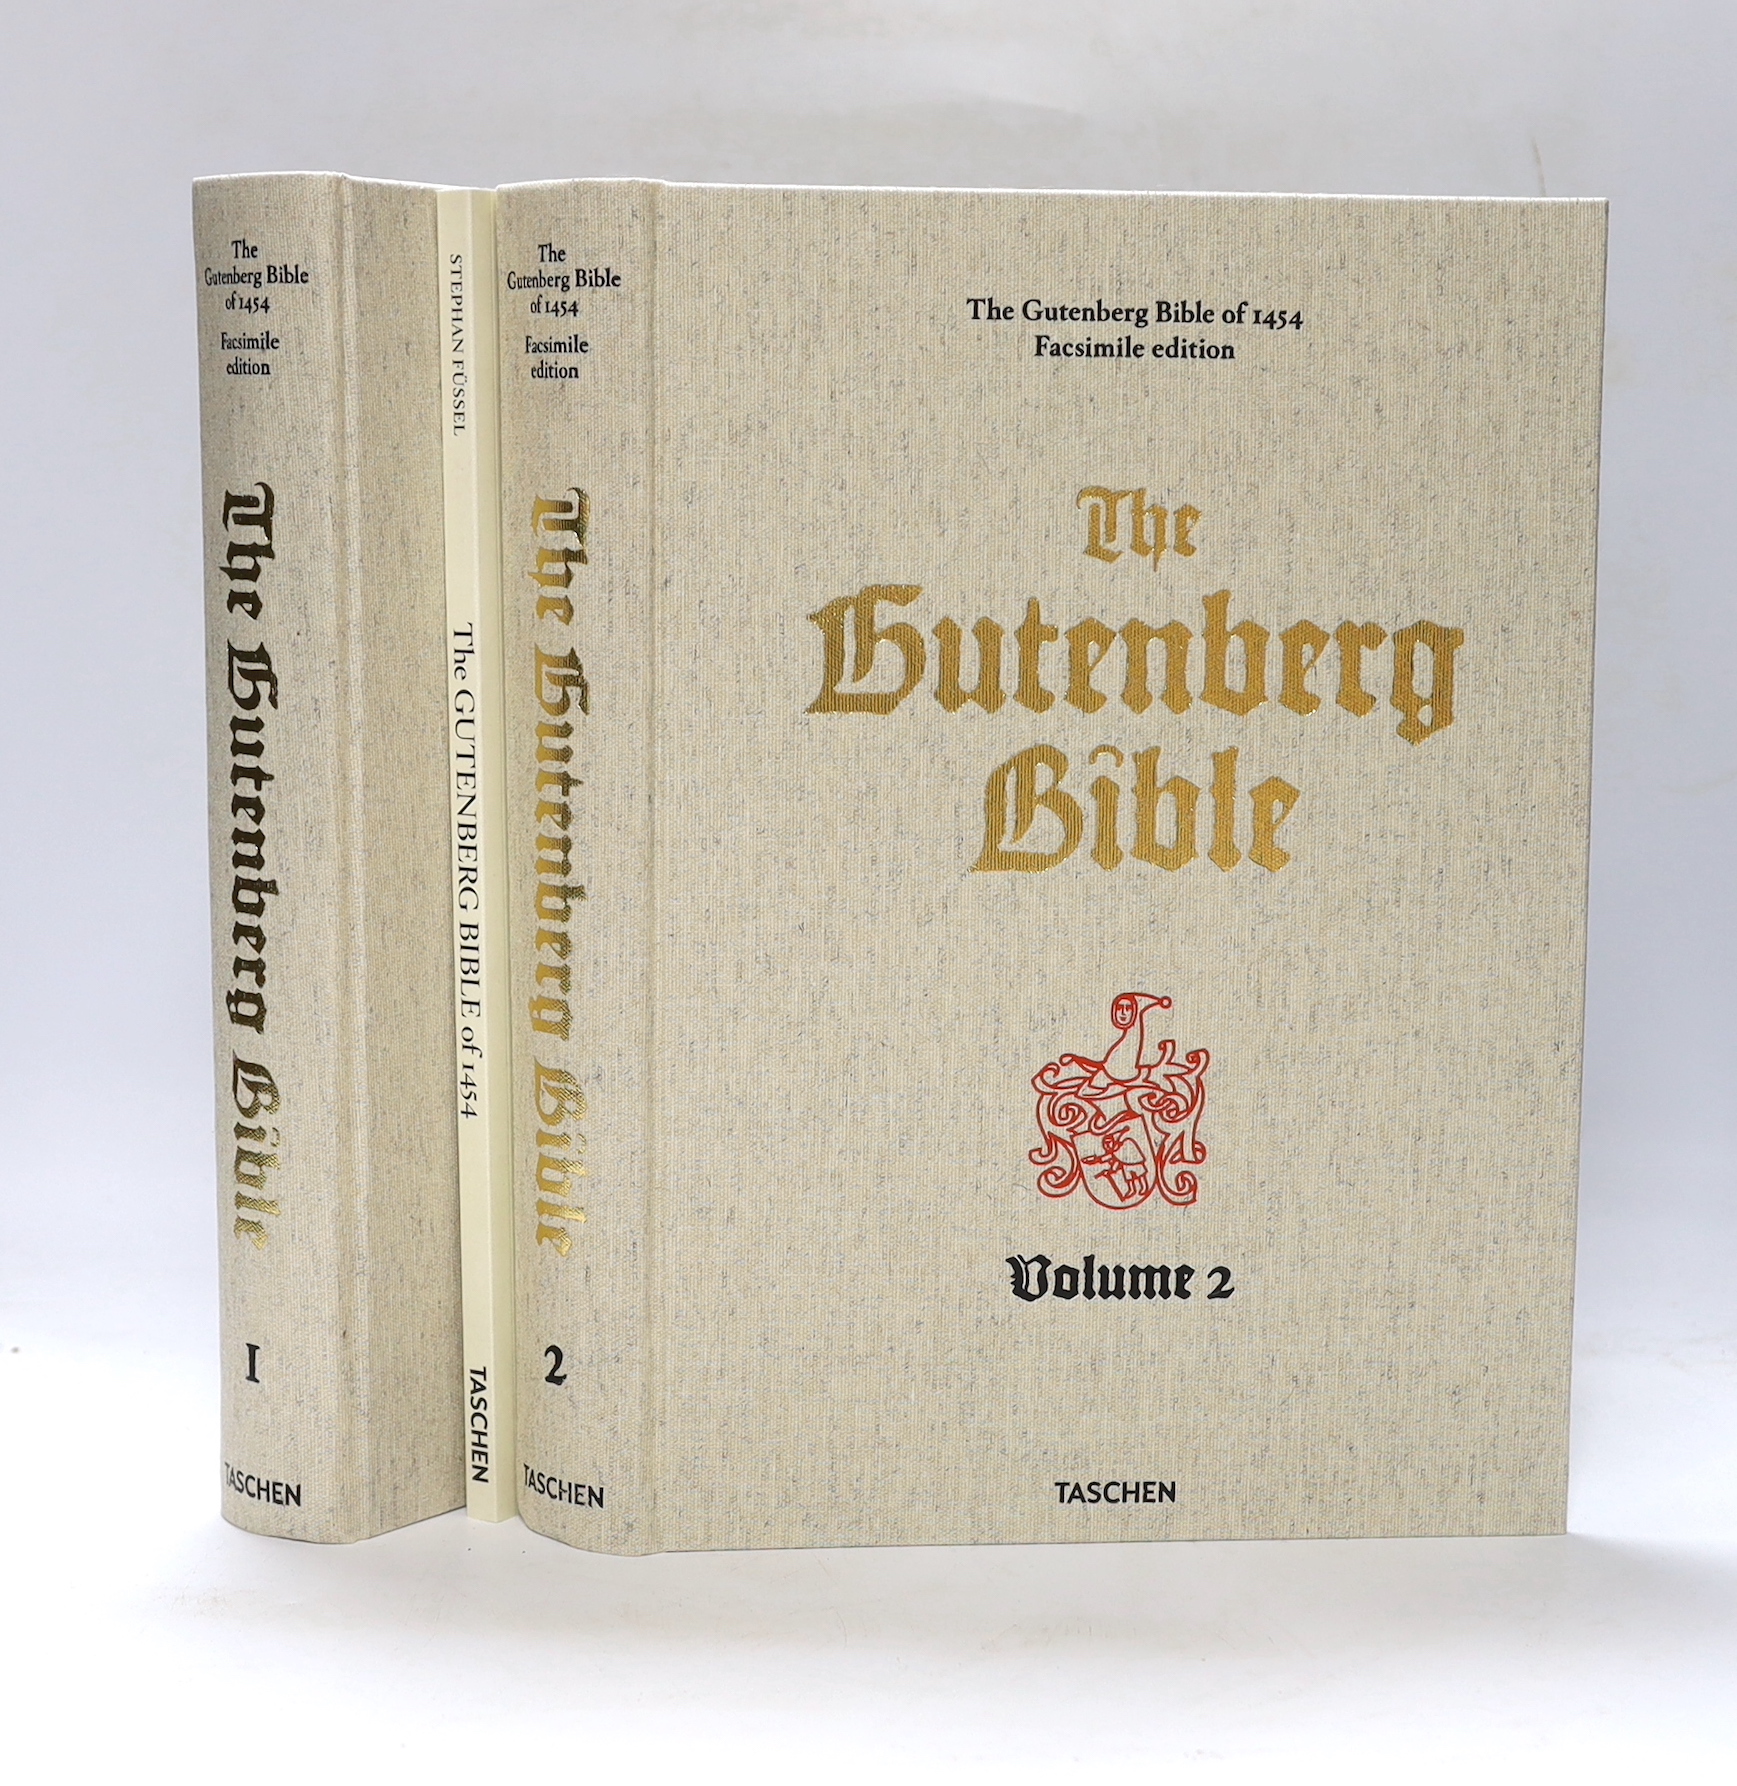 Fussell, Stephan (editor) - The Gutenberg Bible, 2 vols, a facsimile of the 1454 edition, with accompanying booklet, Taschen, Cologne, 2018.